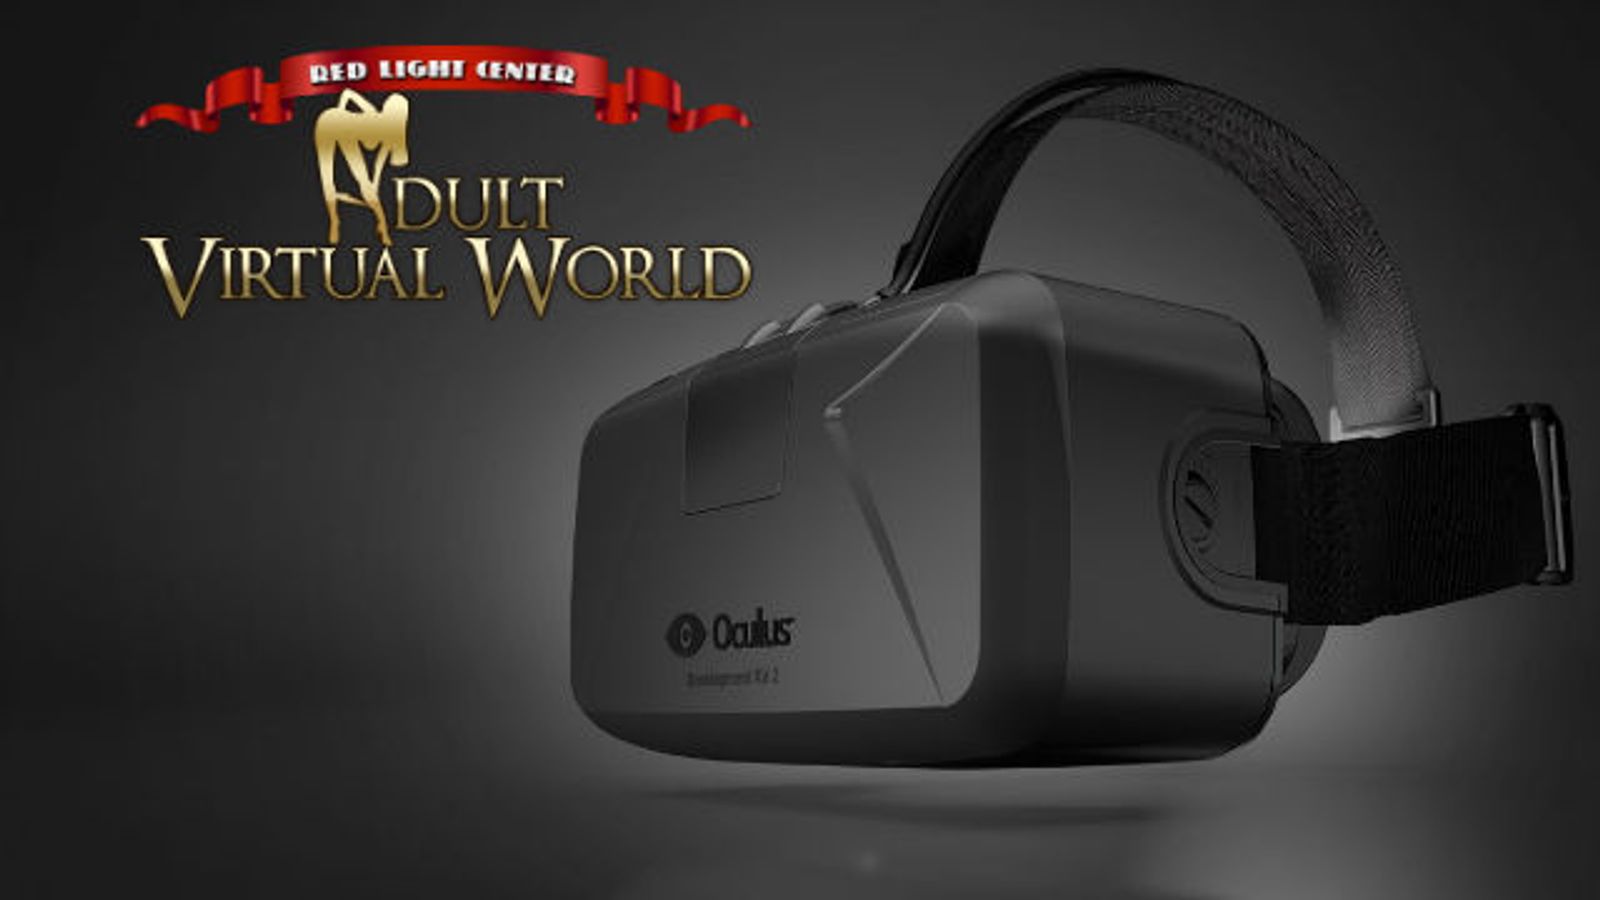 Utherverse to Launch Oculus Rift-Ready Red Light Center at AEE